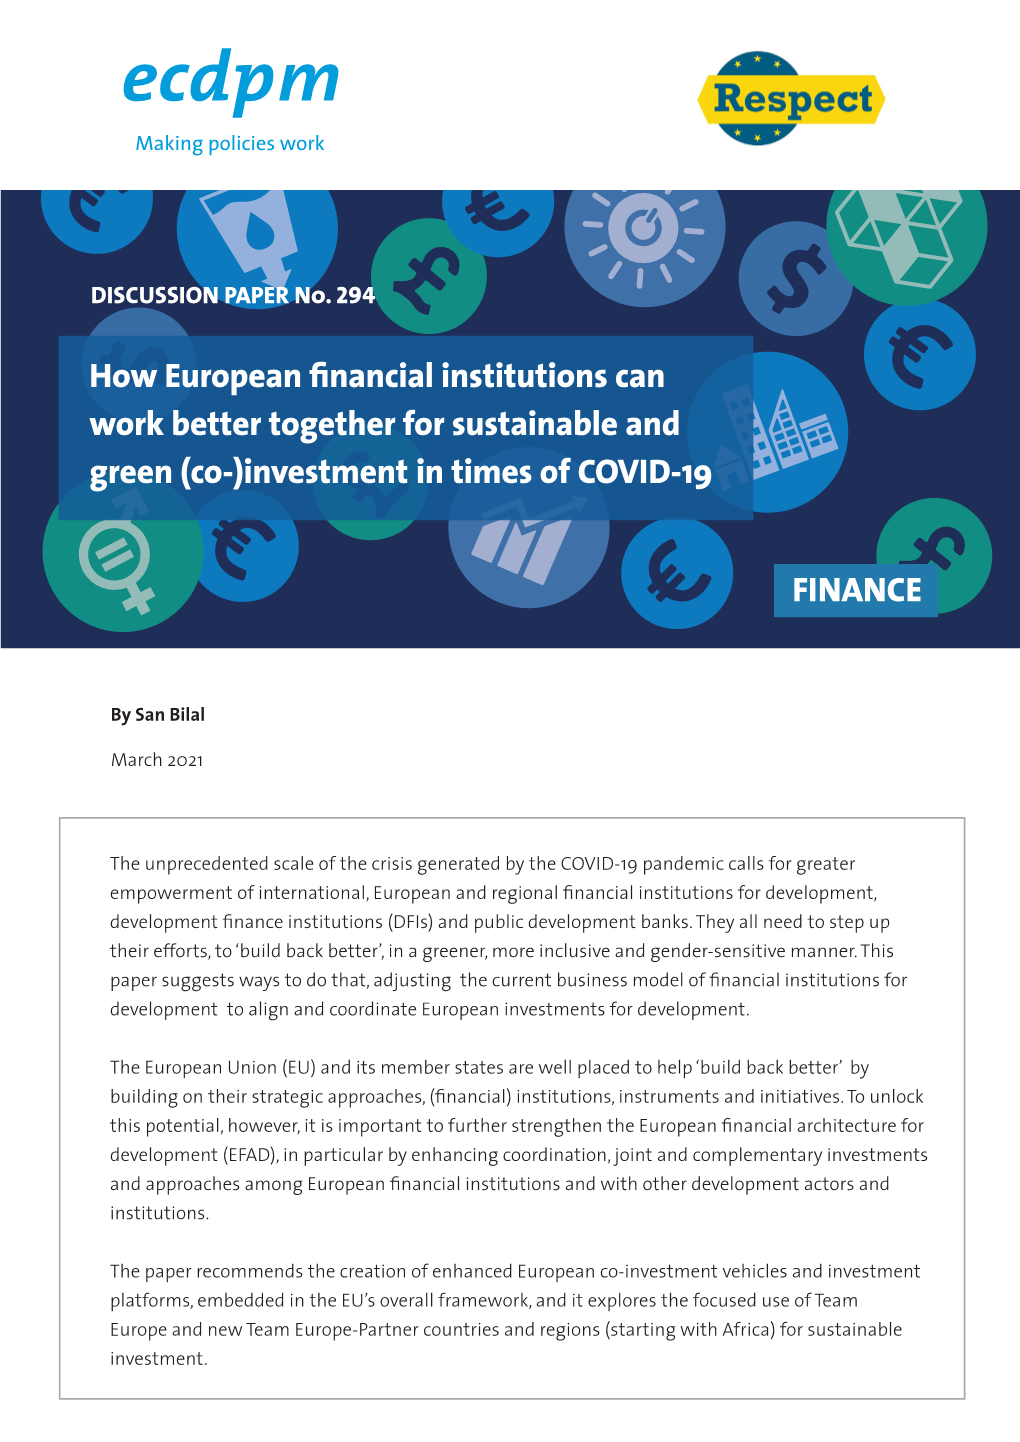 How European Financial Institutions Can Work Better Together for Sustainable and Green (Co-)Investment in Times of COVID-19